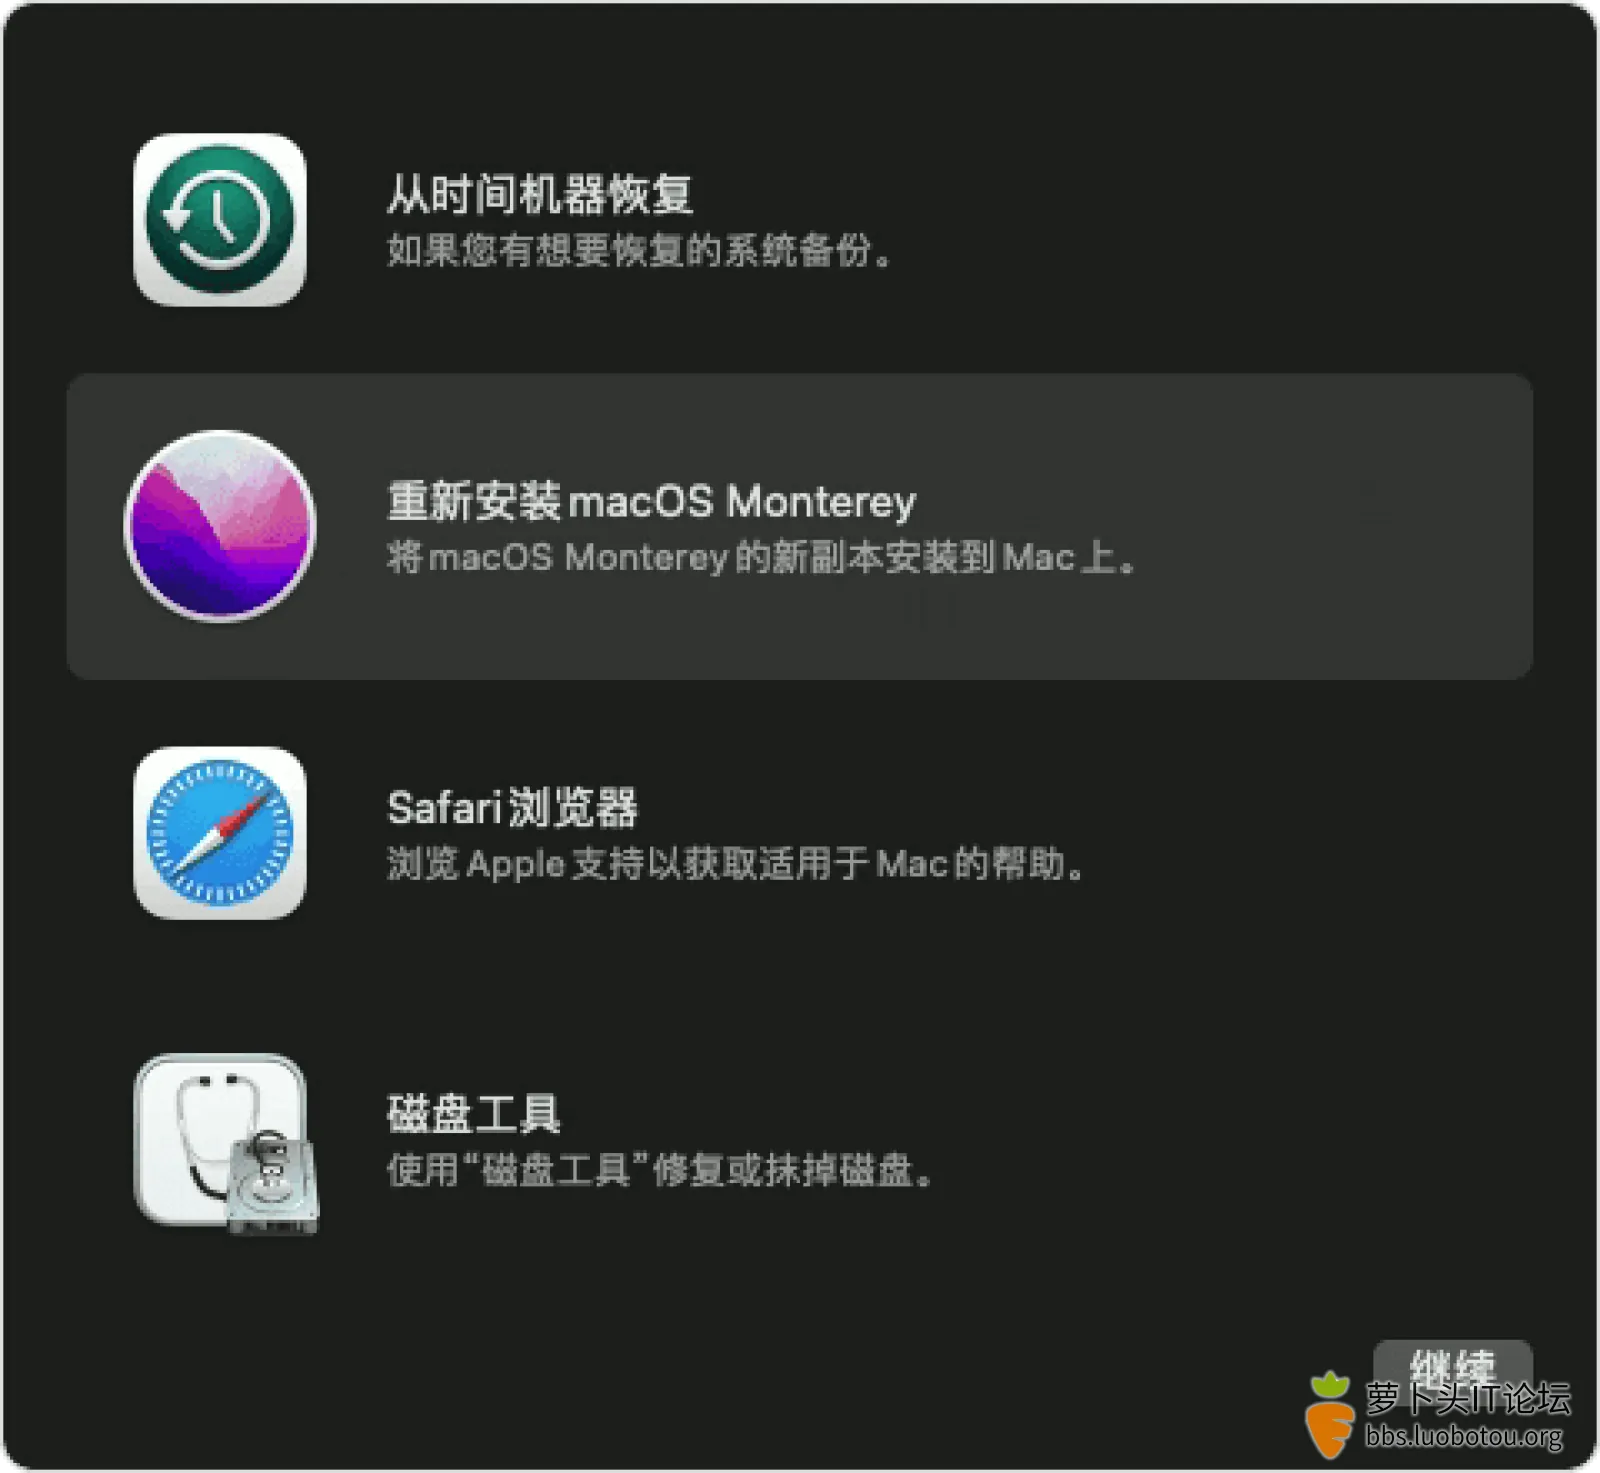 macos-monterey-recovery-reinstall-macos.png